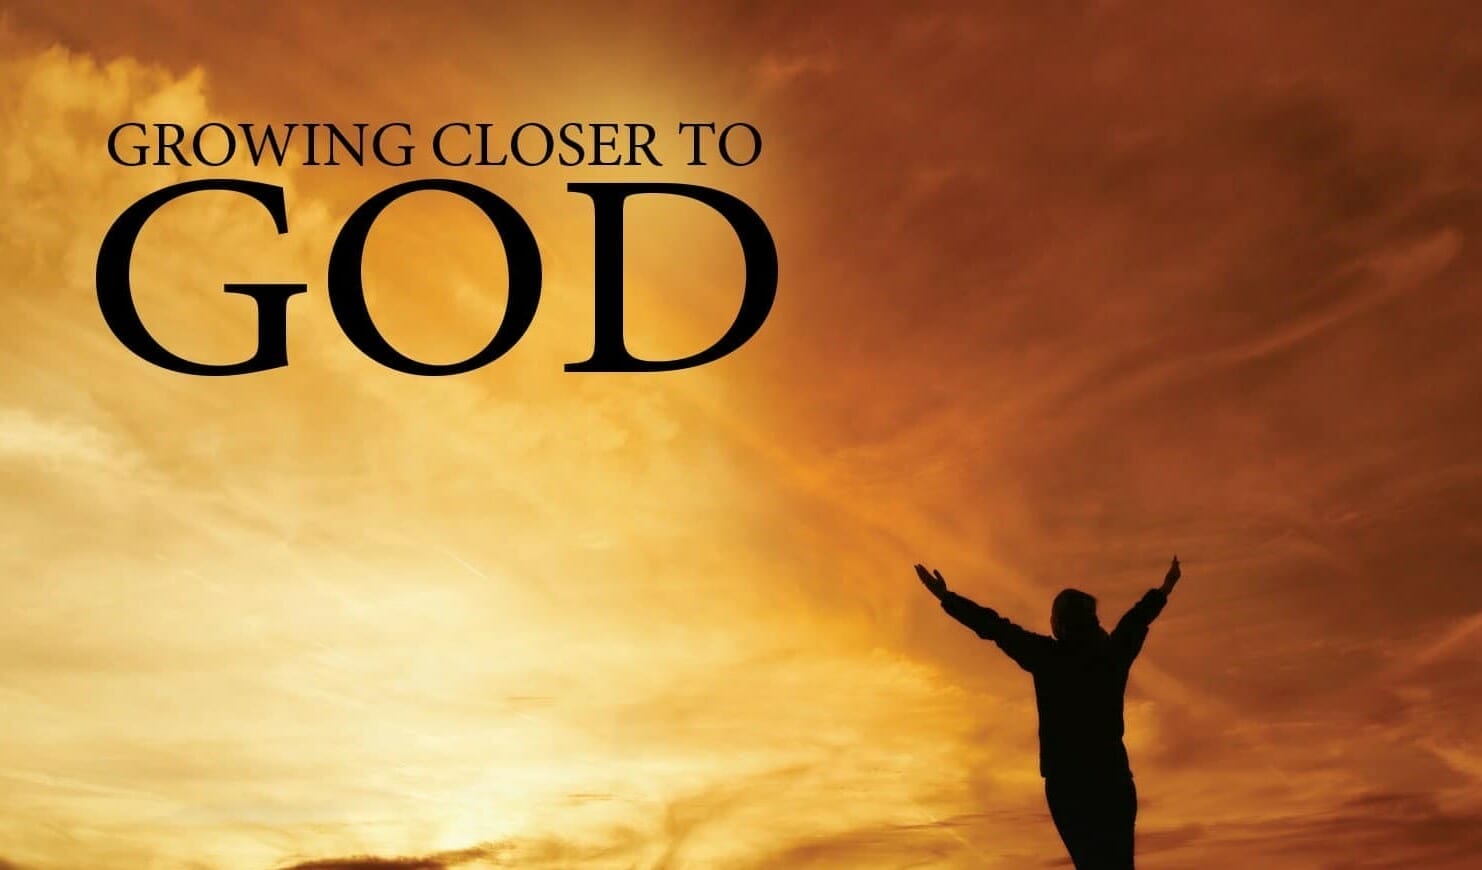 keys to grow closer to god, grow closer to god, keys to powerful prayer, grow closer to jesus, intimacy with god, close fellowship with god, close relationship with god, fellowship with jesus, close relationship with jesus, religion vs relationship, religion vs relationship with god, faith, trust, communication, love, agape love